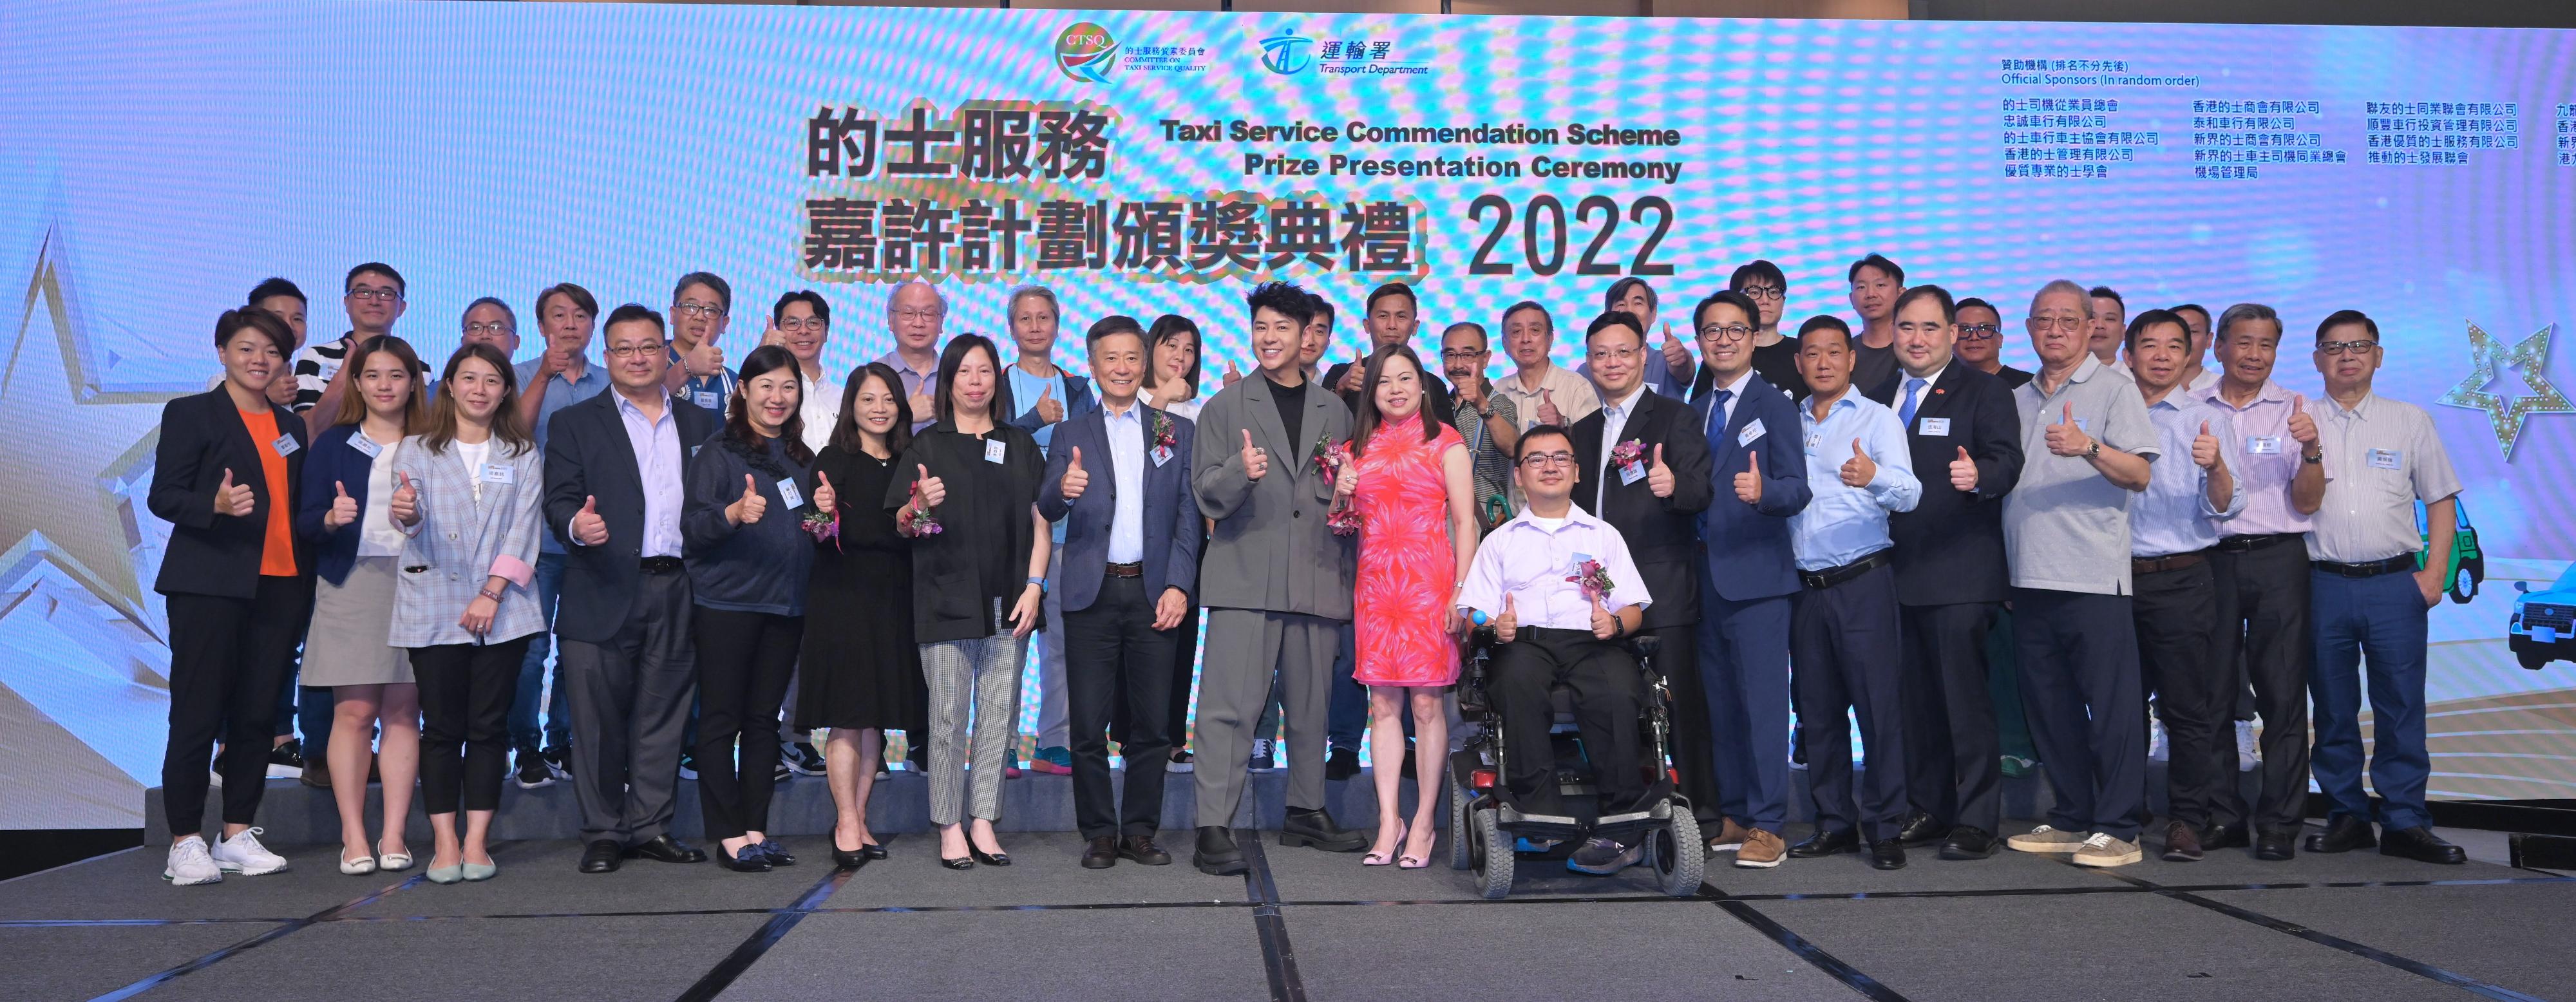 The prize presentation ceremony for the Taxi Service Commendation Scheme 2022, jointly organised by the Committee on Taxi Service Quality (CTSQ) and the Transport Department, was held today (July 14). The CTSQ Chairman and Commissioner for Transport, Miss Rosanna Law (front row, tenth right); the Deputy Commissioner for Transport (Transport Services and Management), Ms Macella Lee (front row, seventh left); the Assistant Commissioner for Transport (Management and Paratransit), Mr Honson Yuen (front row, eighth right), and members of the CTSQ are pictured with awardees and guests.